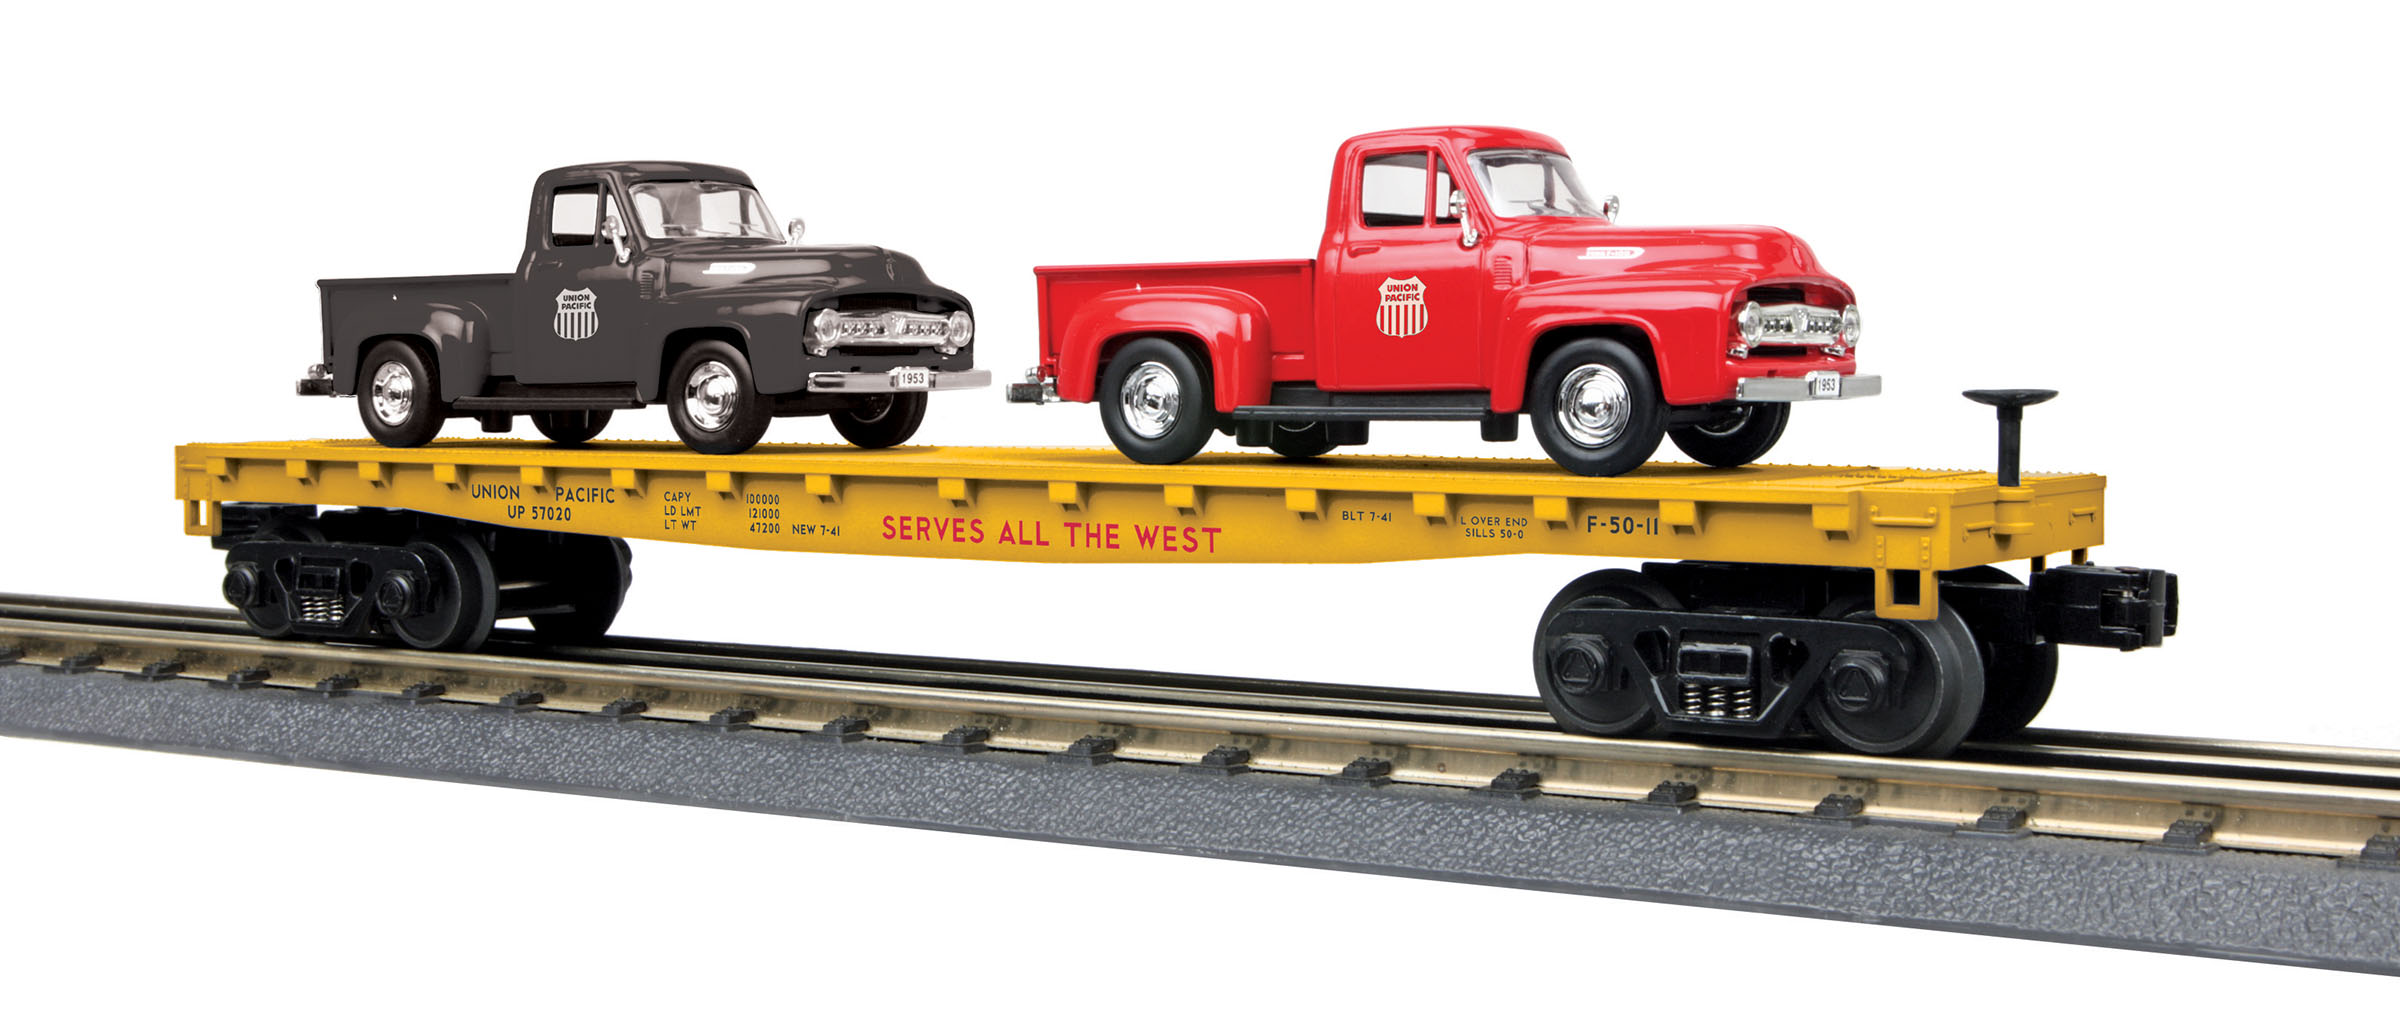 MTH 30-7629 Transportation Company Flatcar With ERTL Fire Truck for sale online 